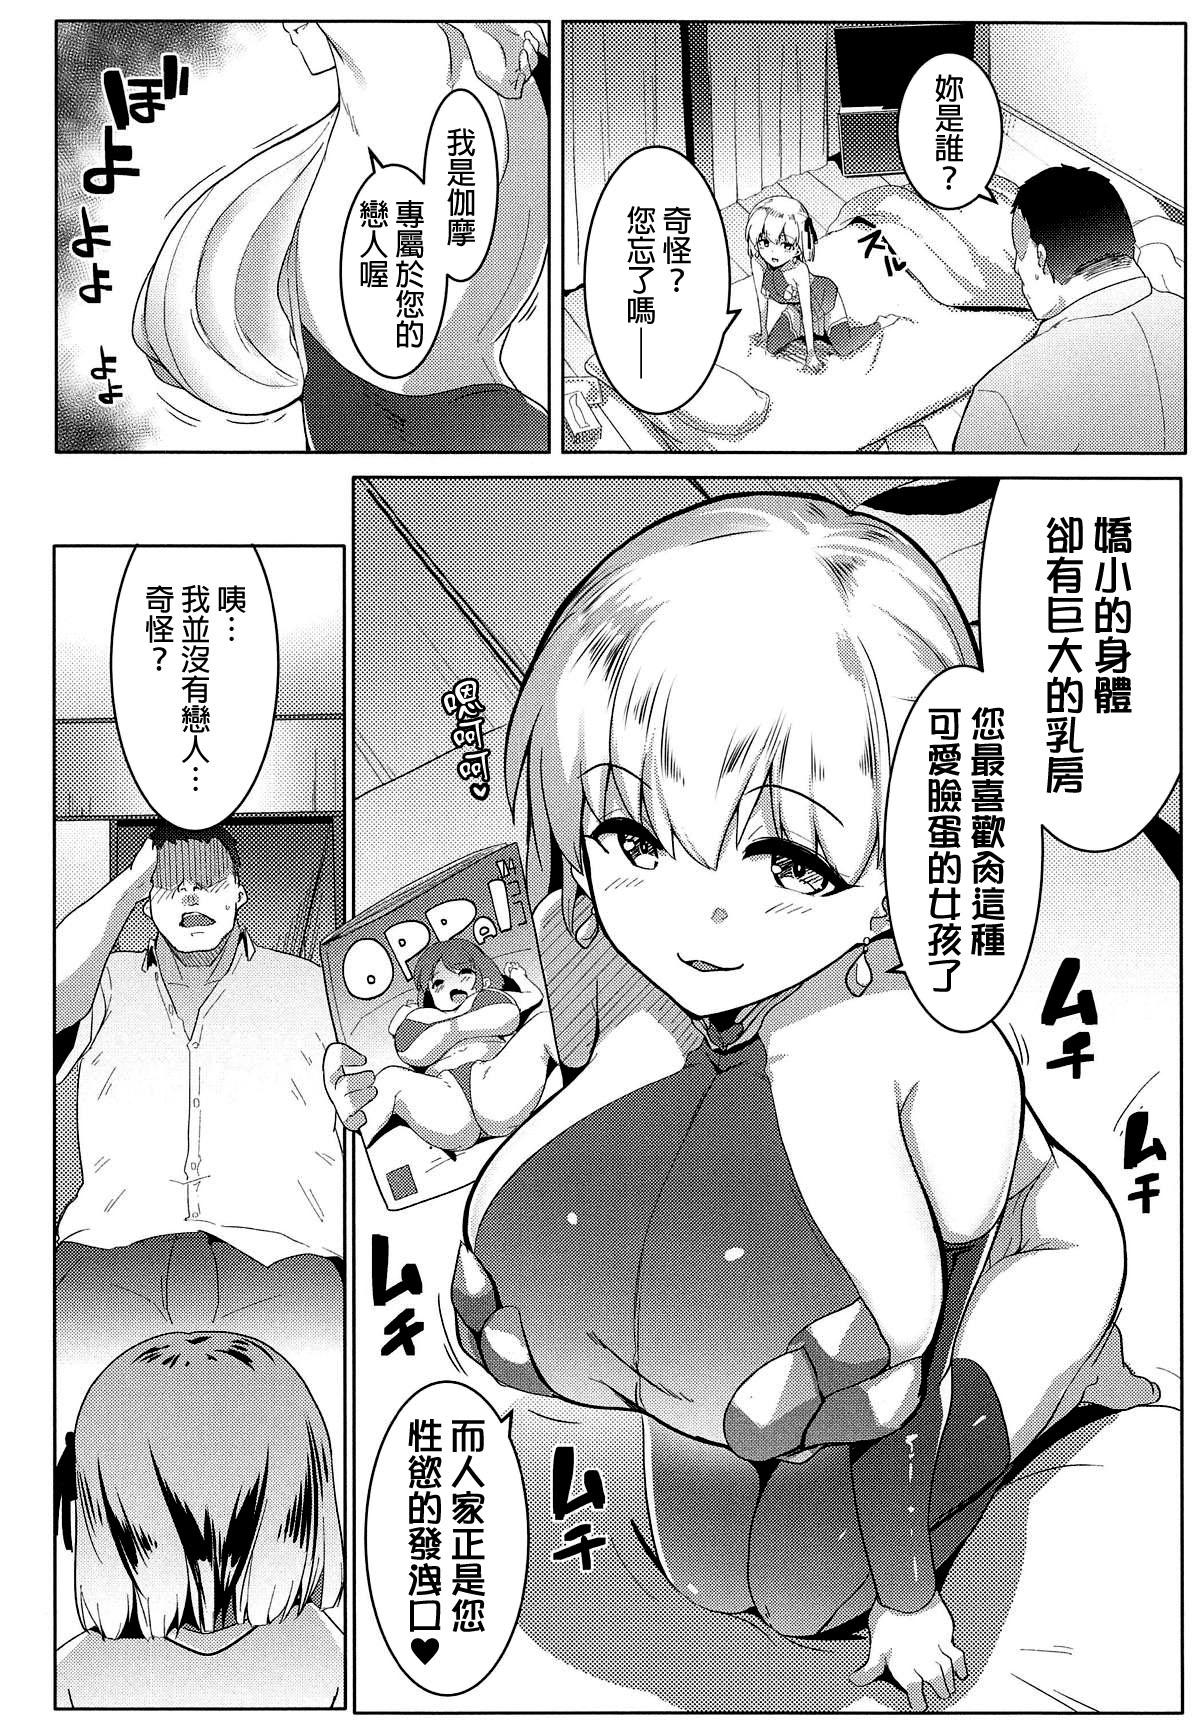 Flexible Hame Kama - Fate grand order Livesex - Page 5